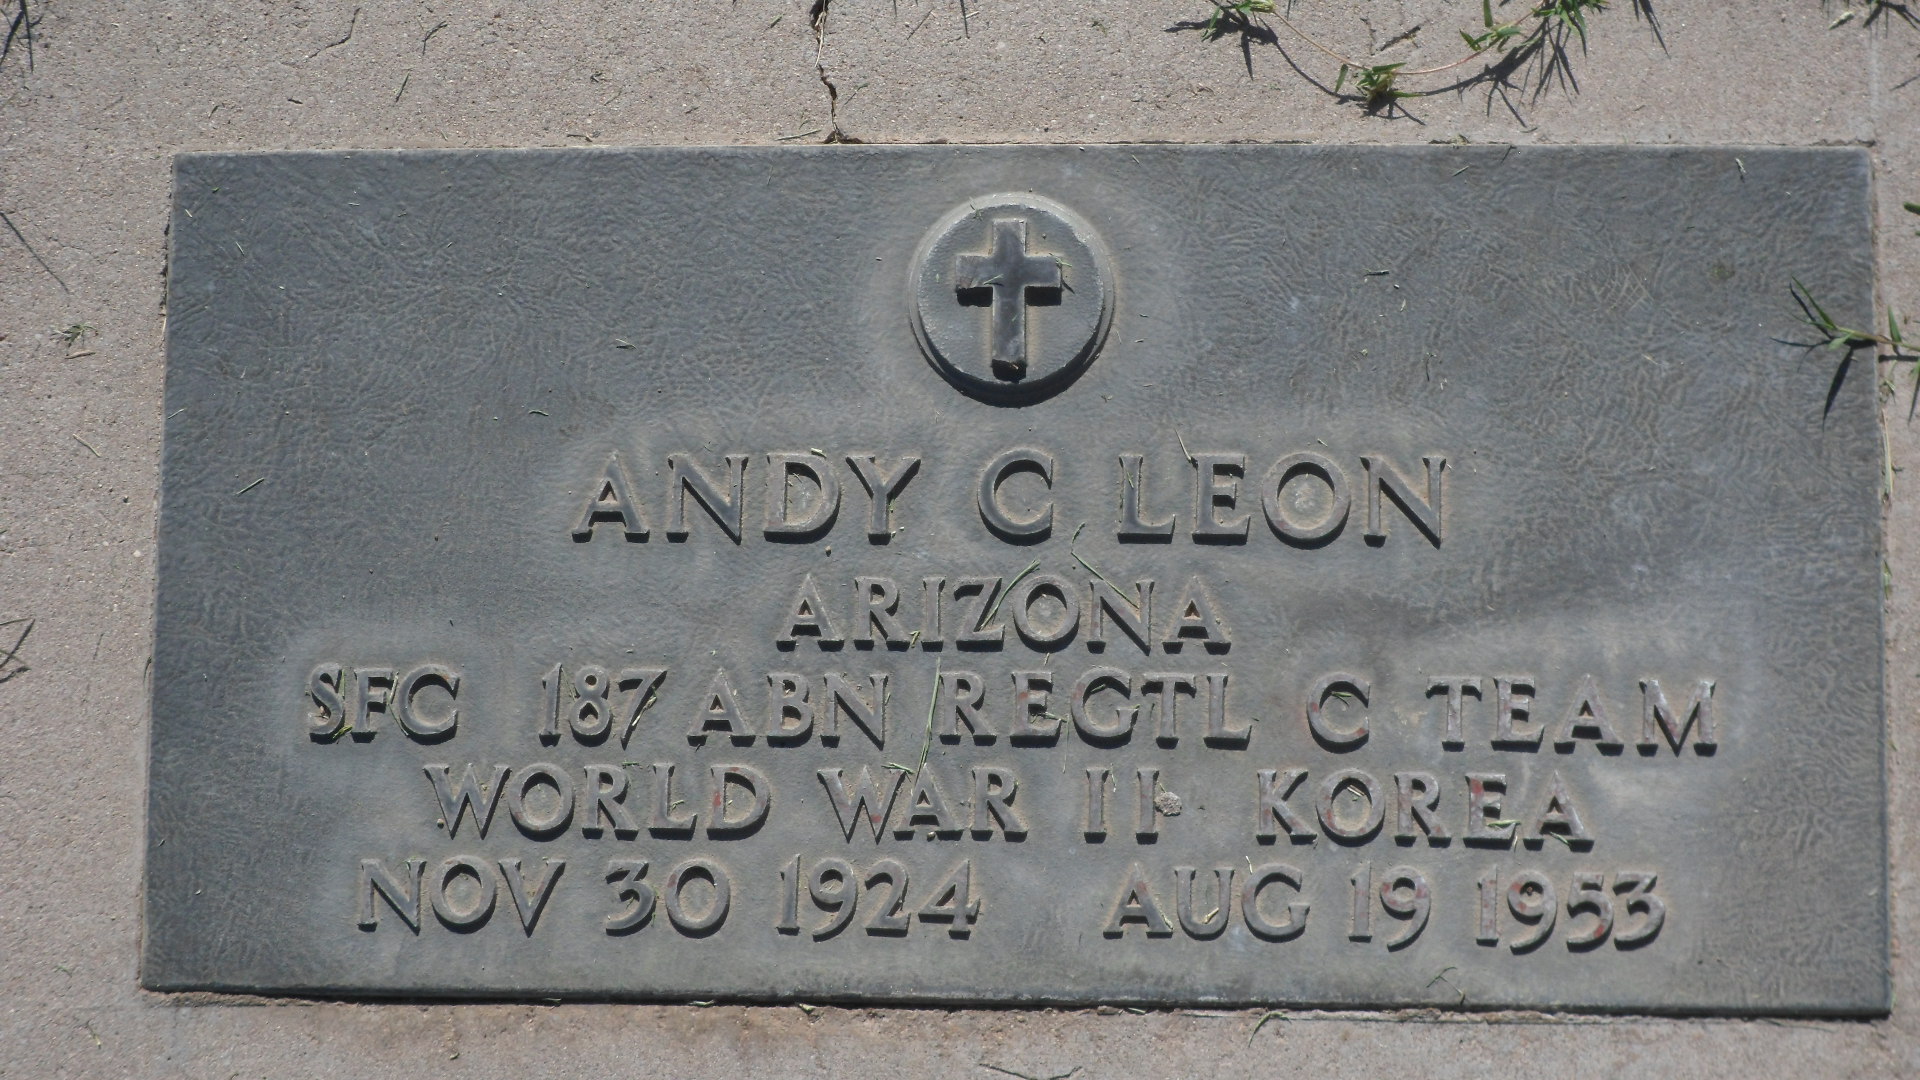 Sergeant First Class Andy Chacon Leon | United States Army Military Police Corps, U.S. Government